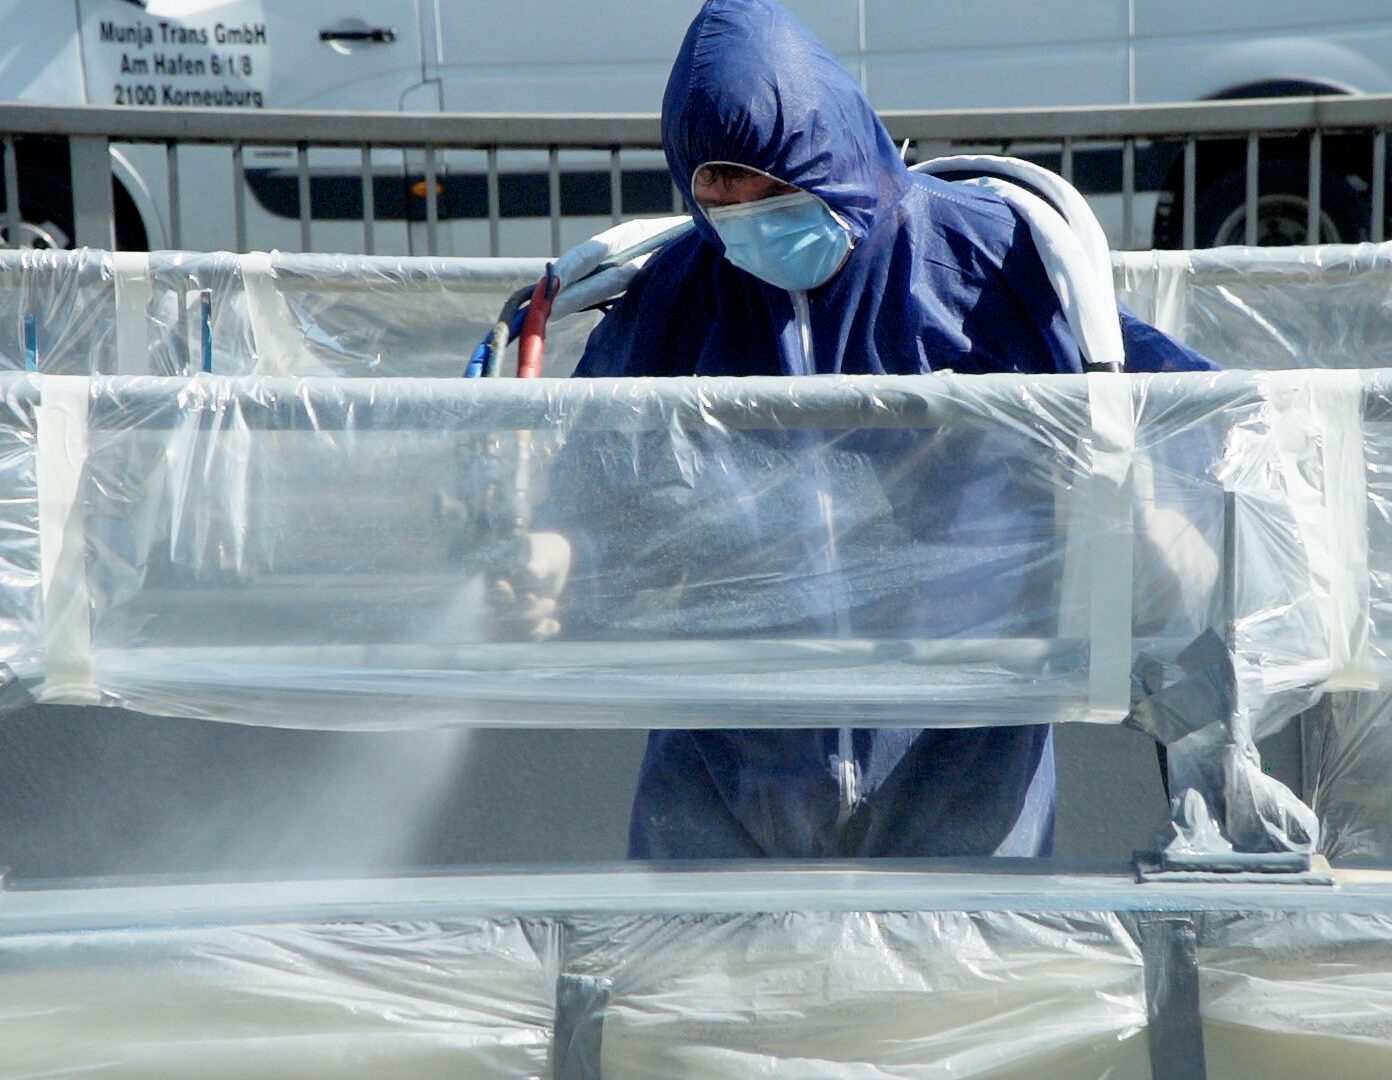 A man in a blue suit spraying a Polyflex container.